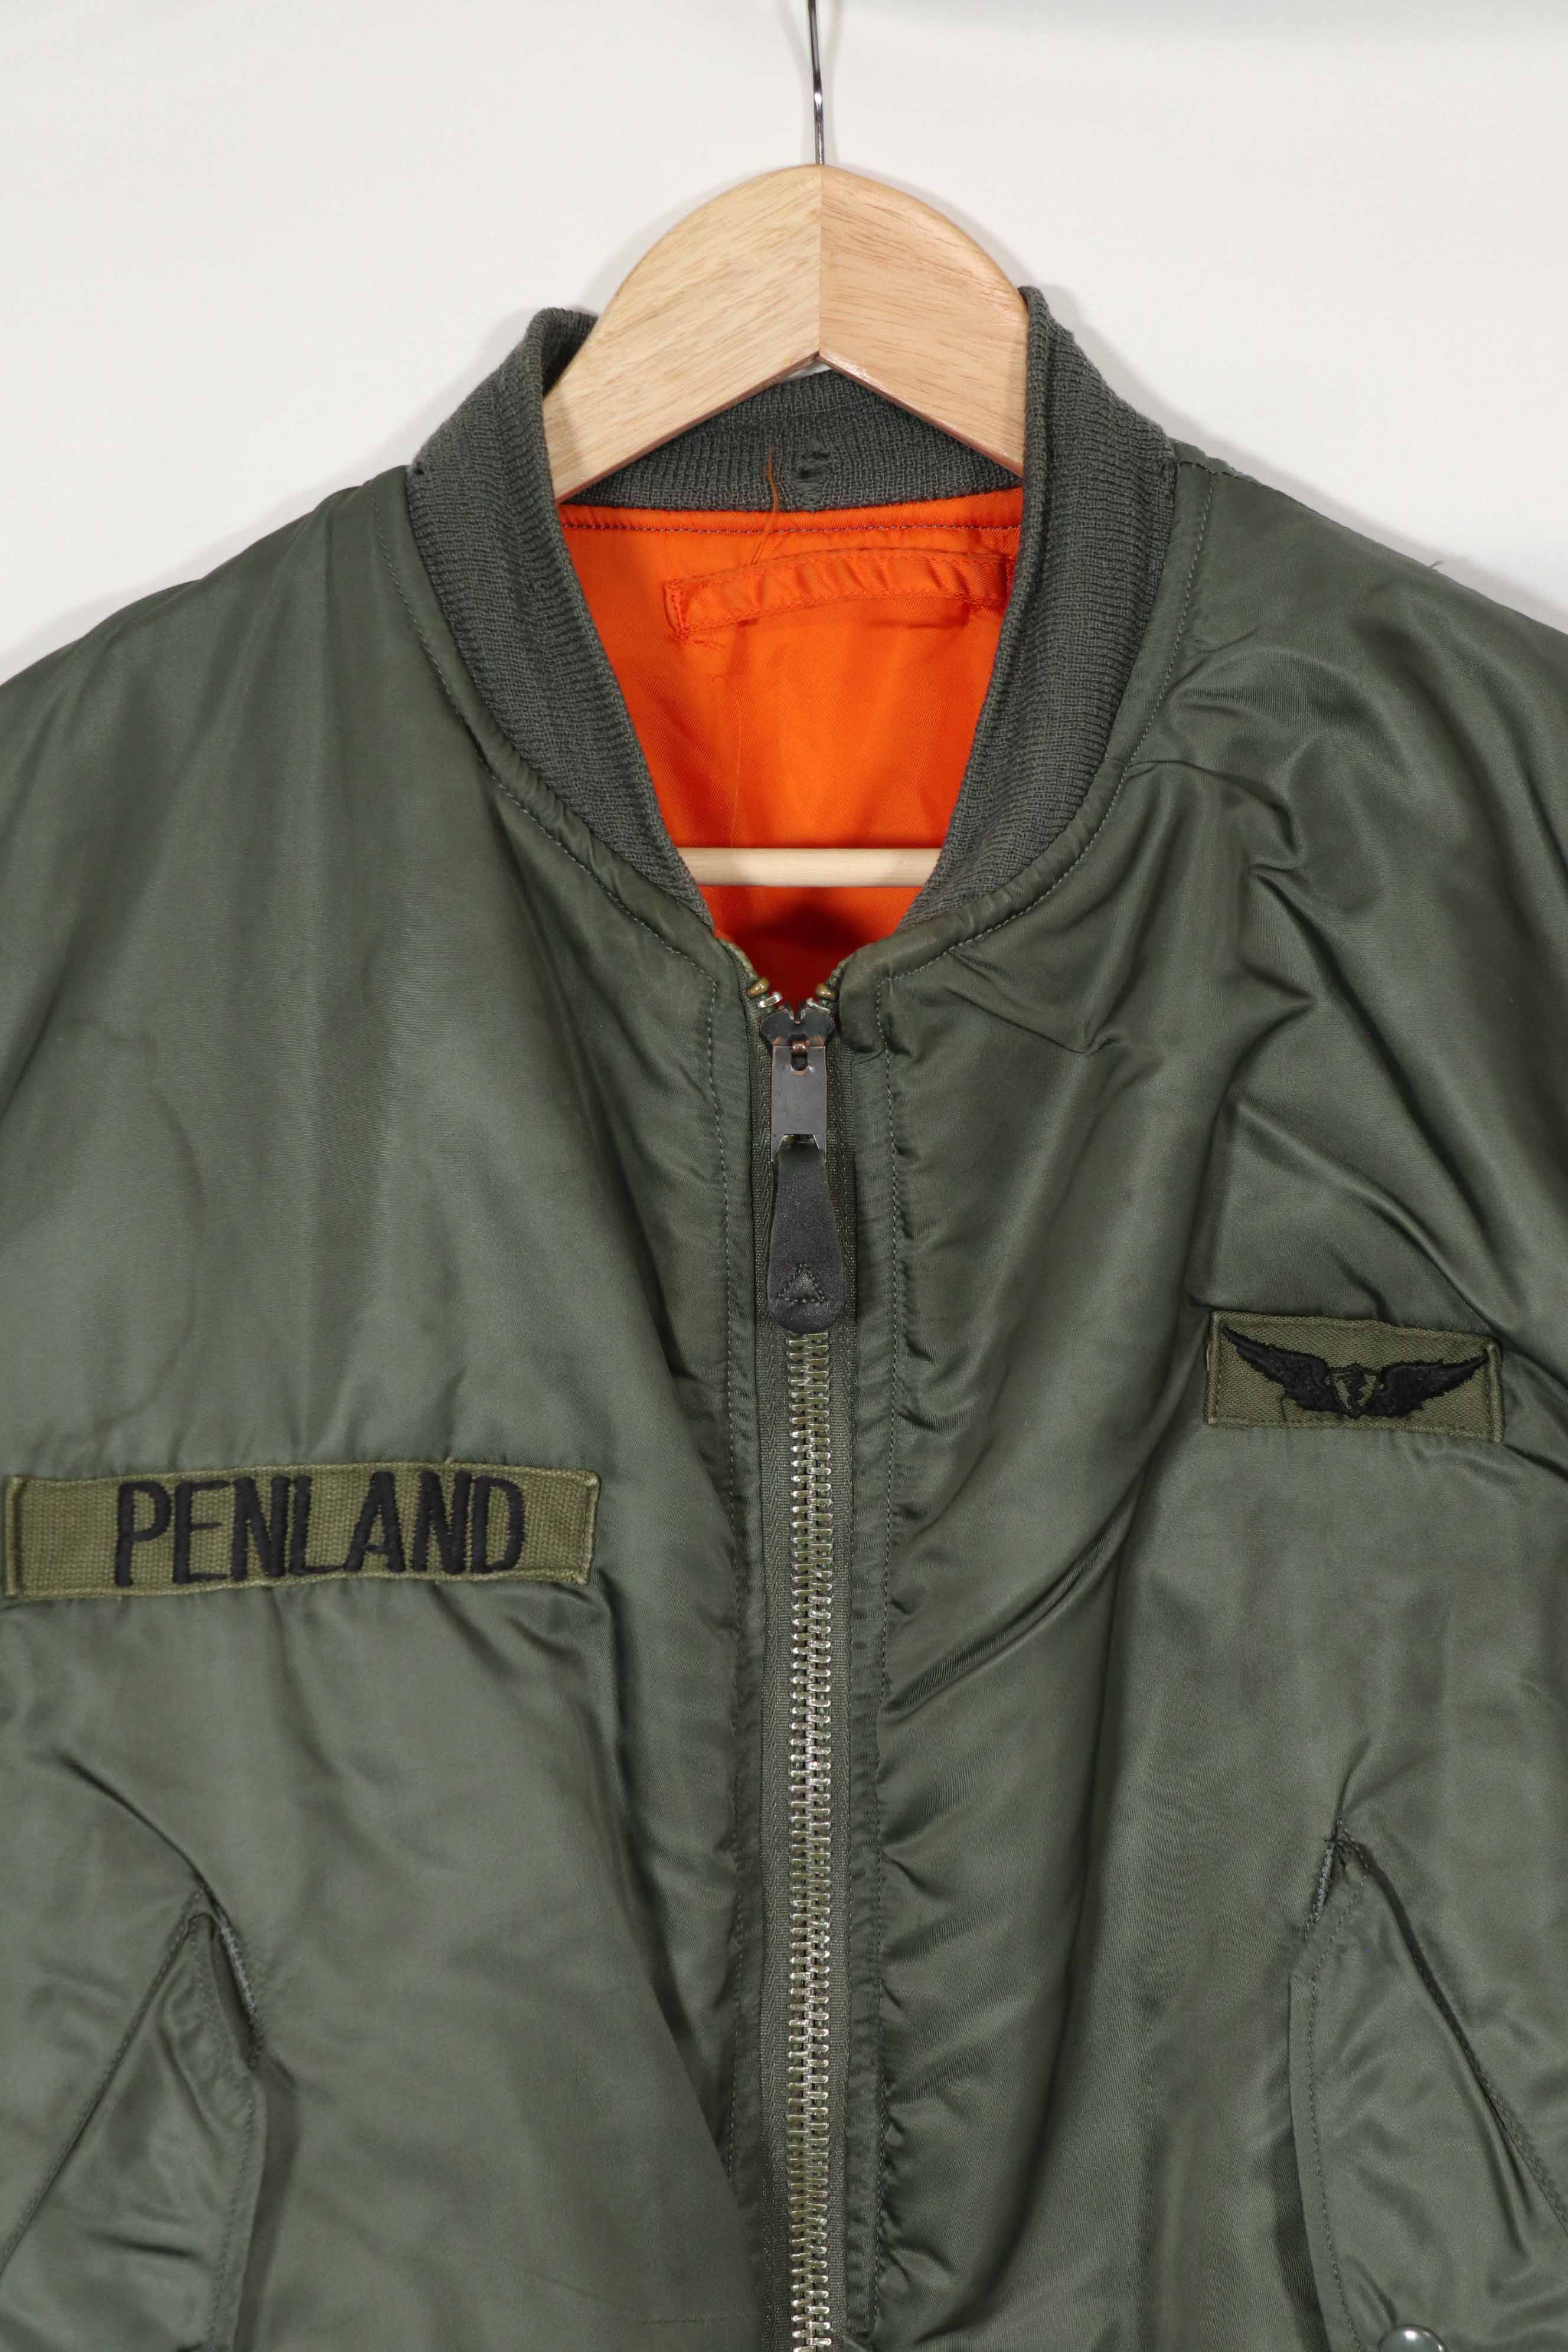 Real 1972 MA-1 flight jacket, used by US Army, knit damaged.